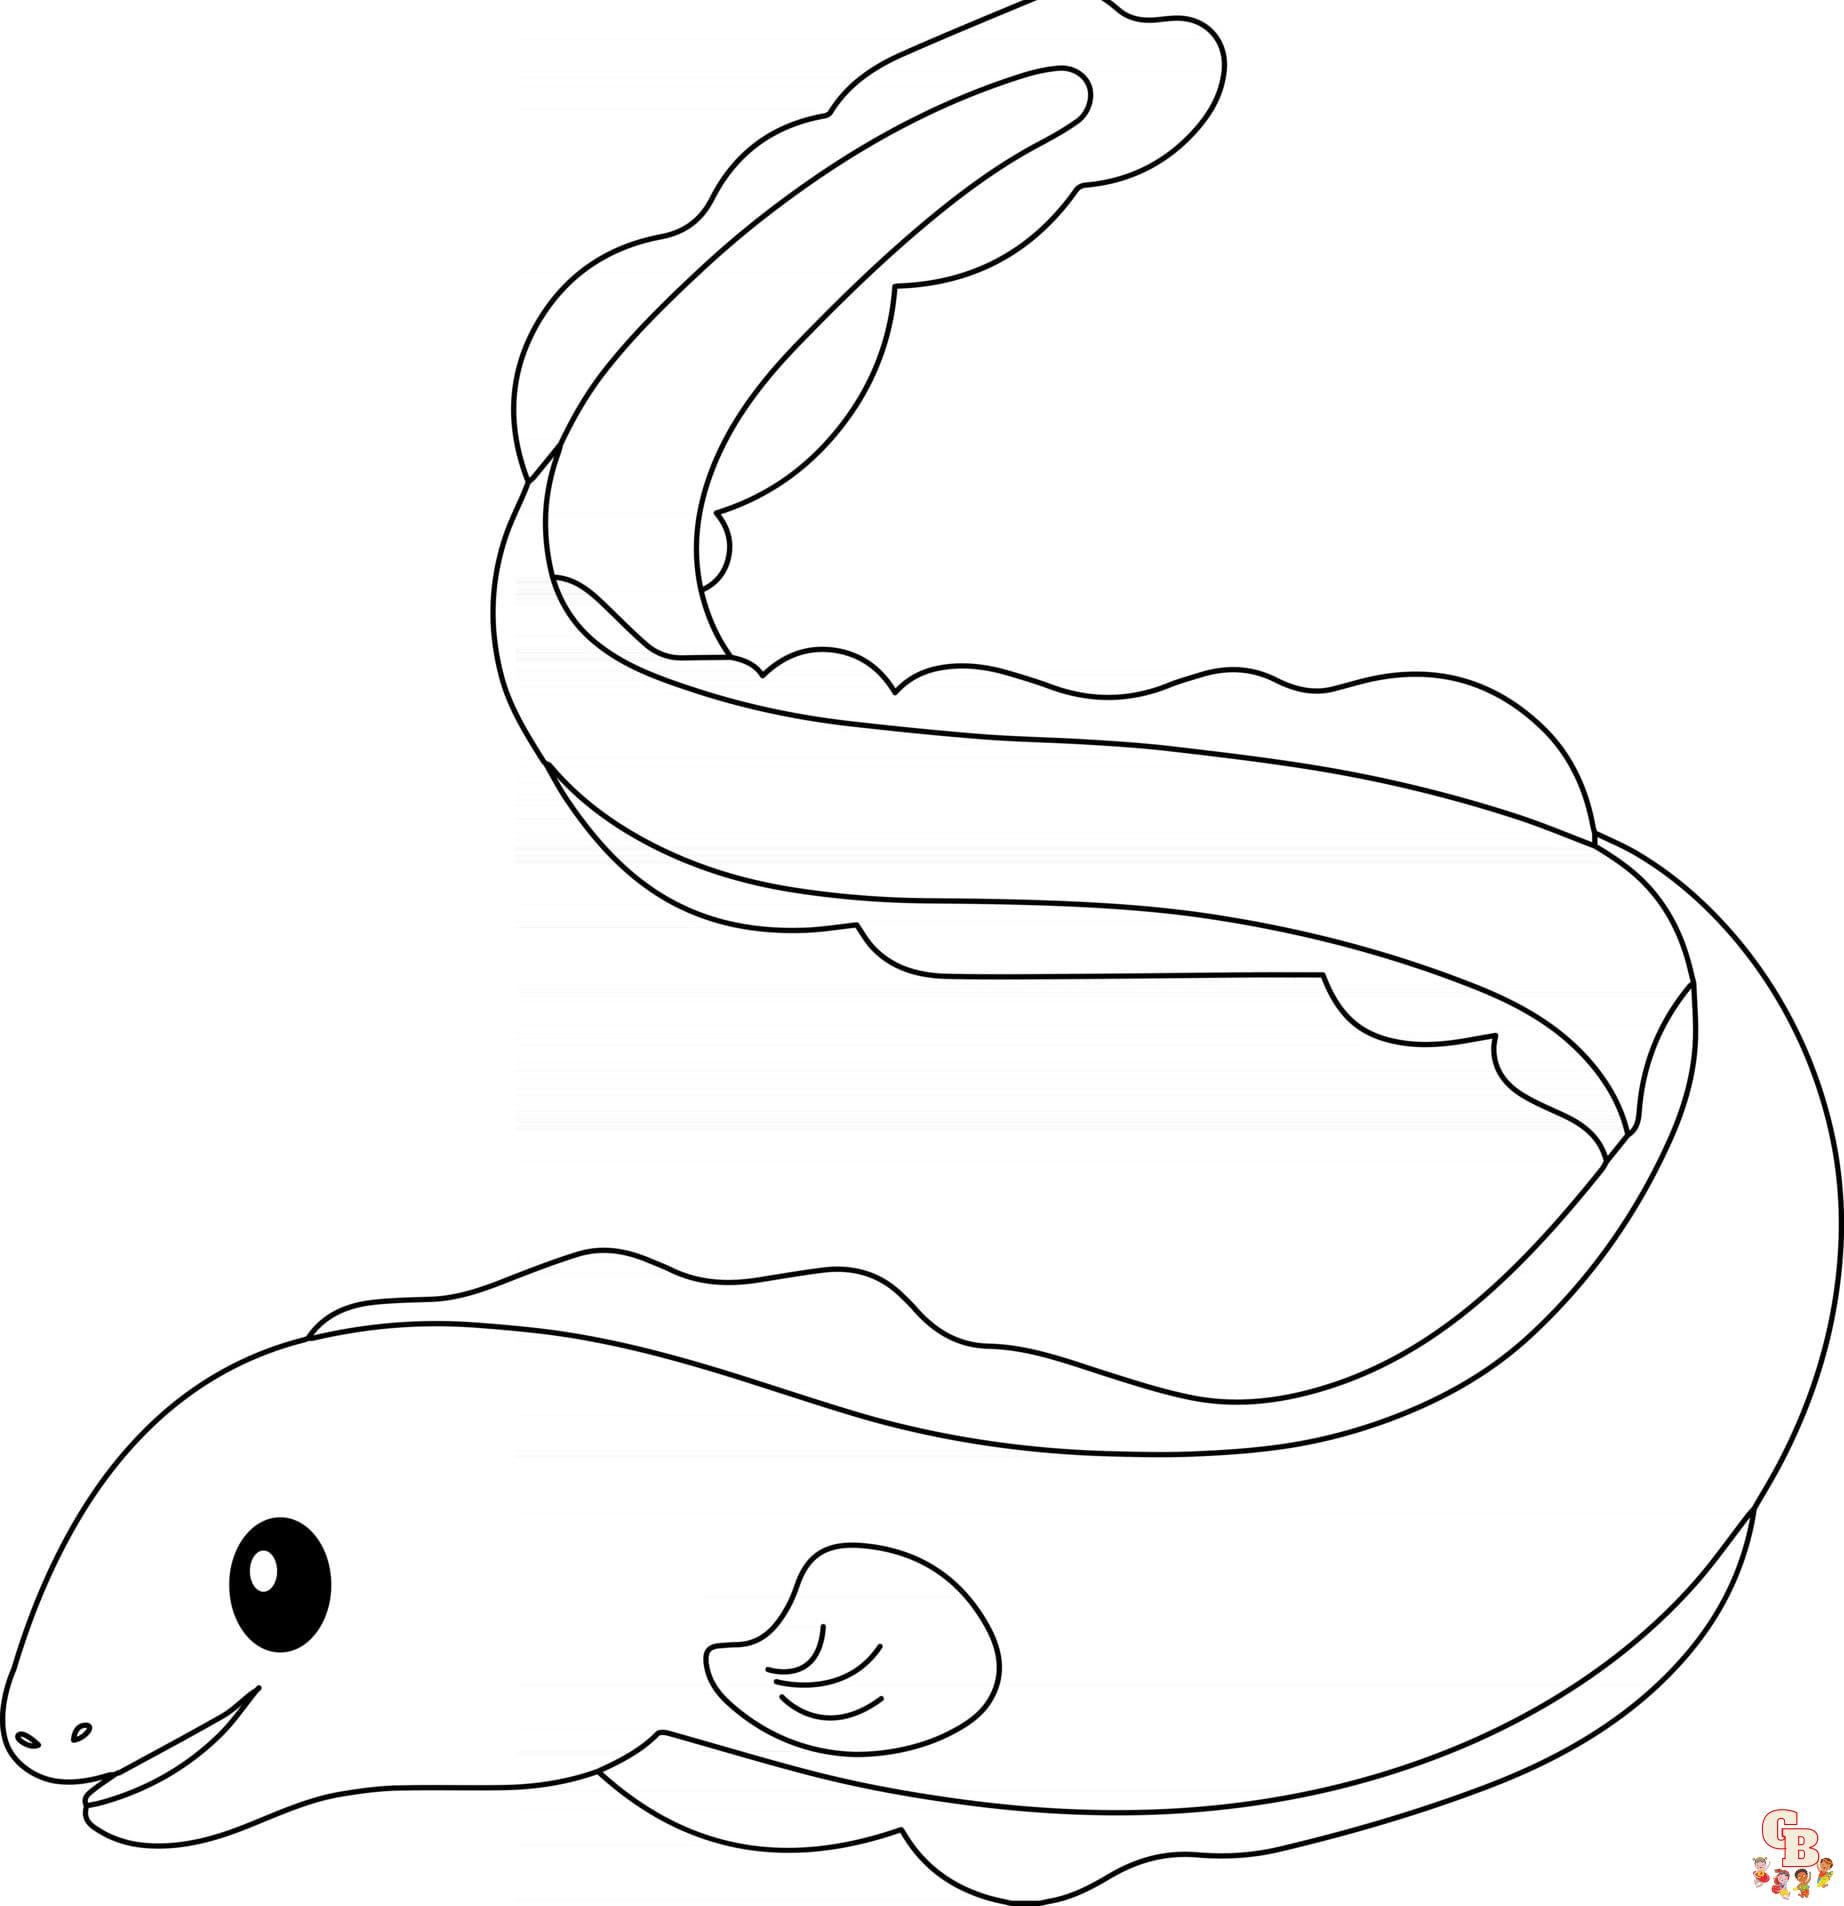 Eel coloring pages printable free